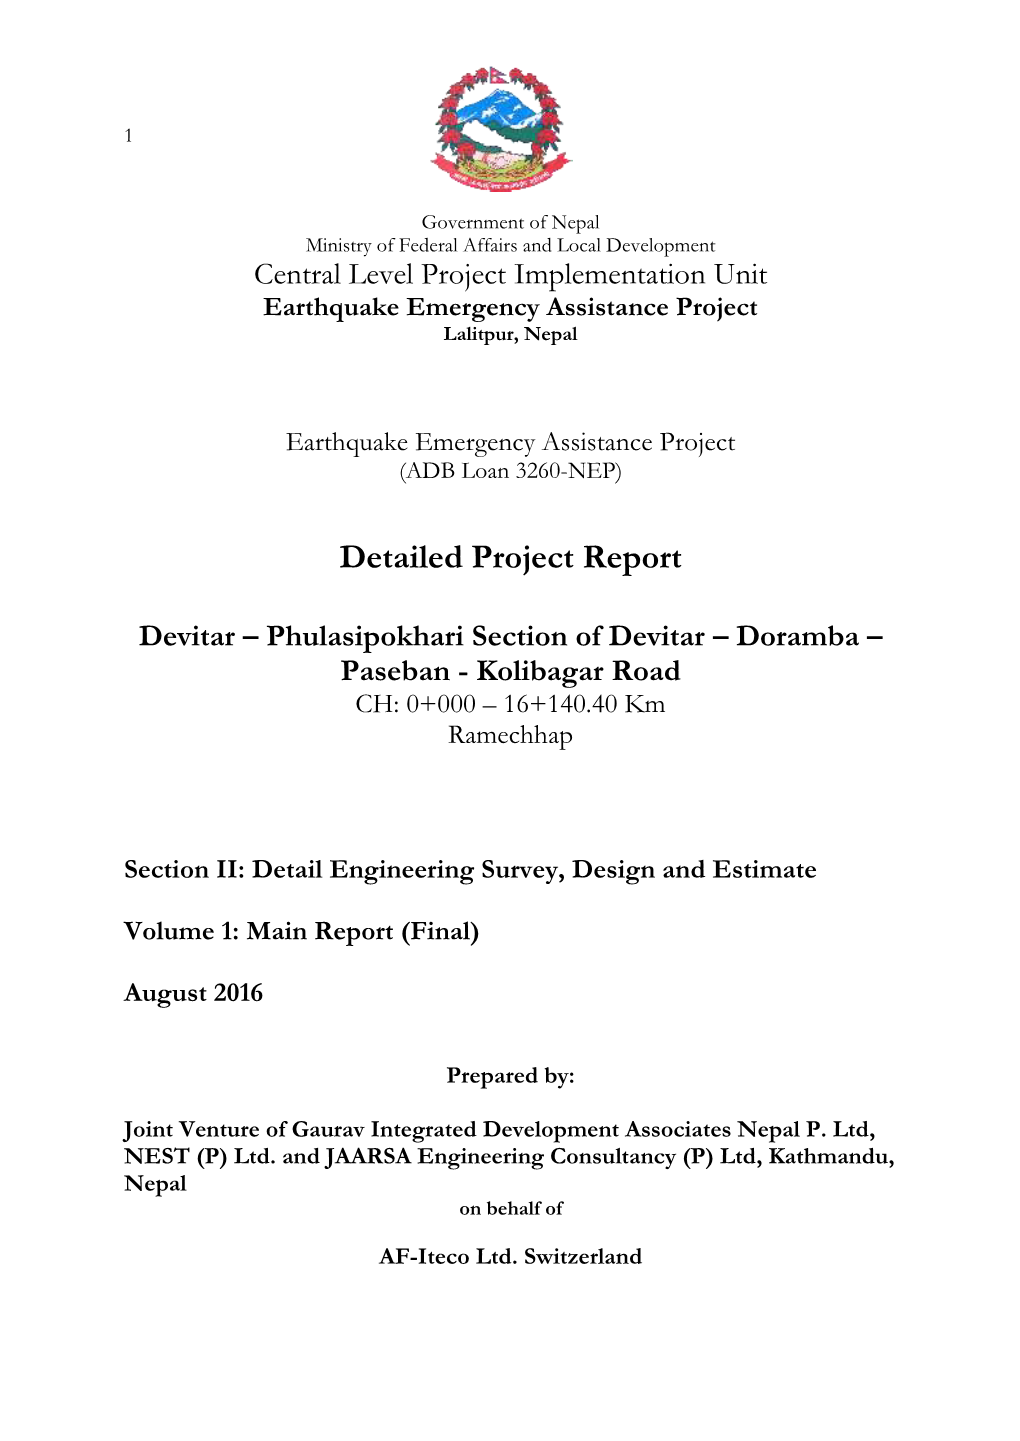 Detailed Project Report